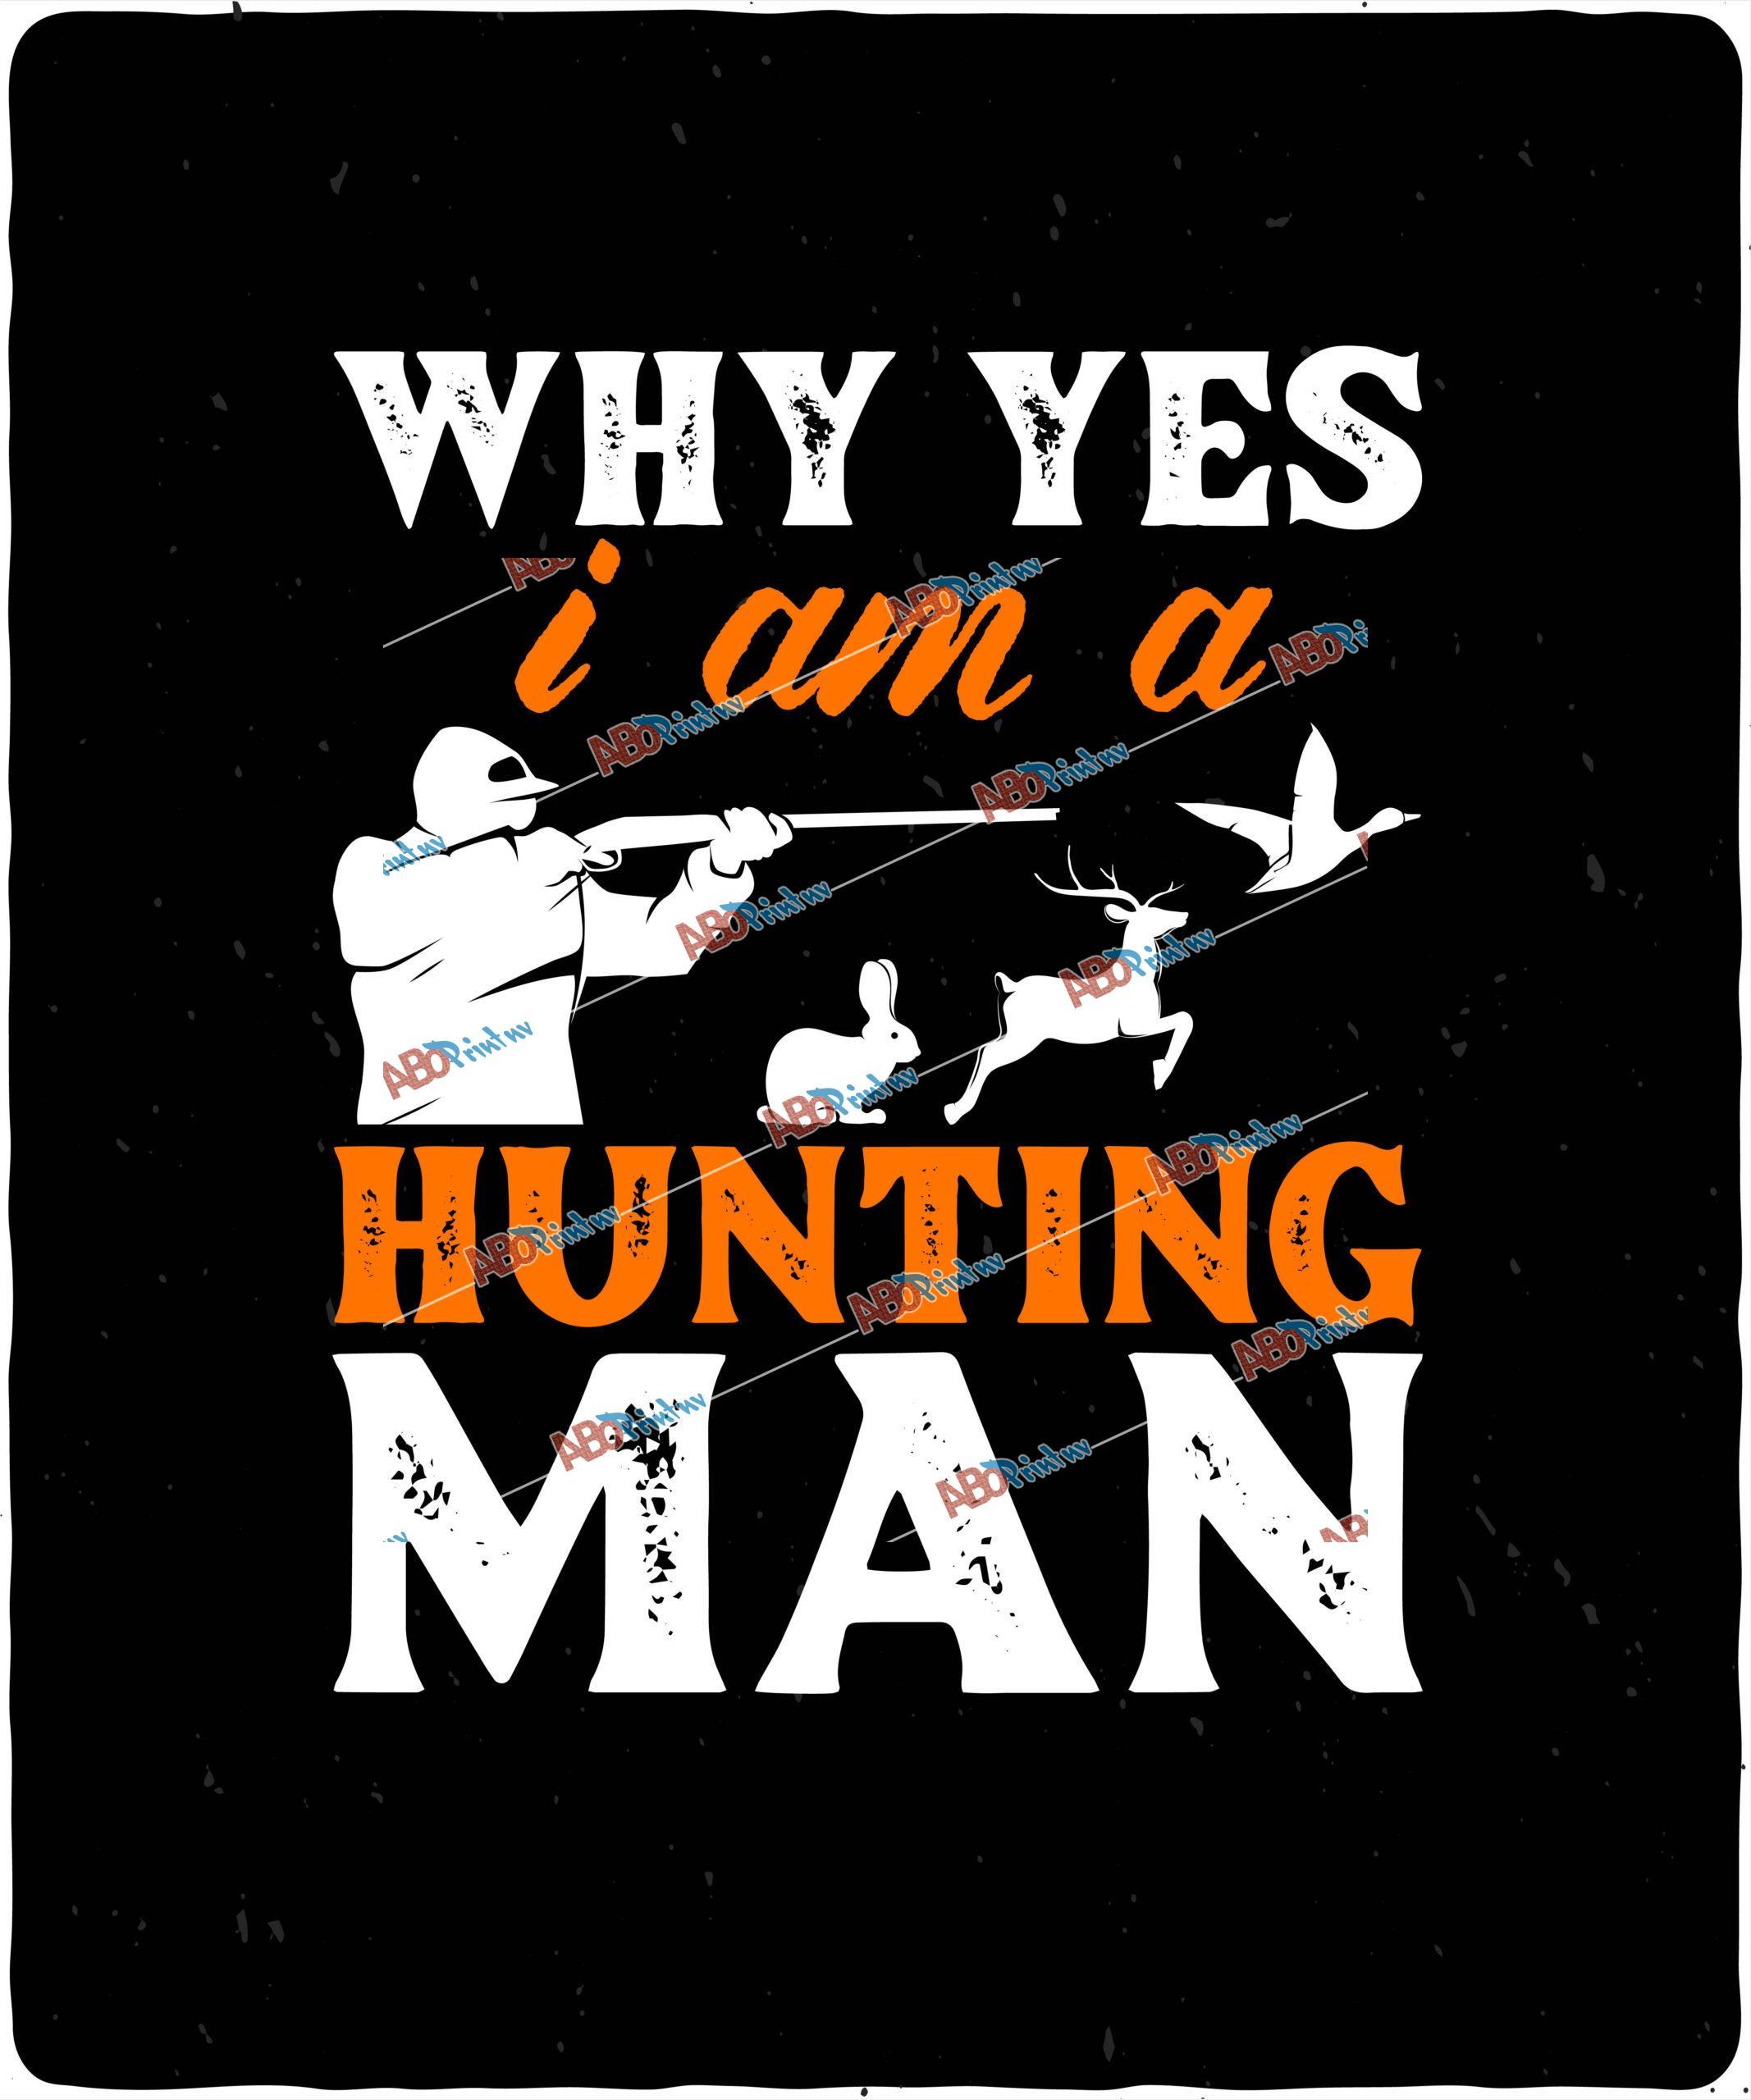 why yes i’am a hunting man